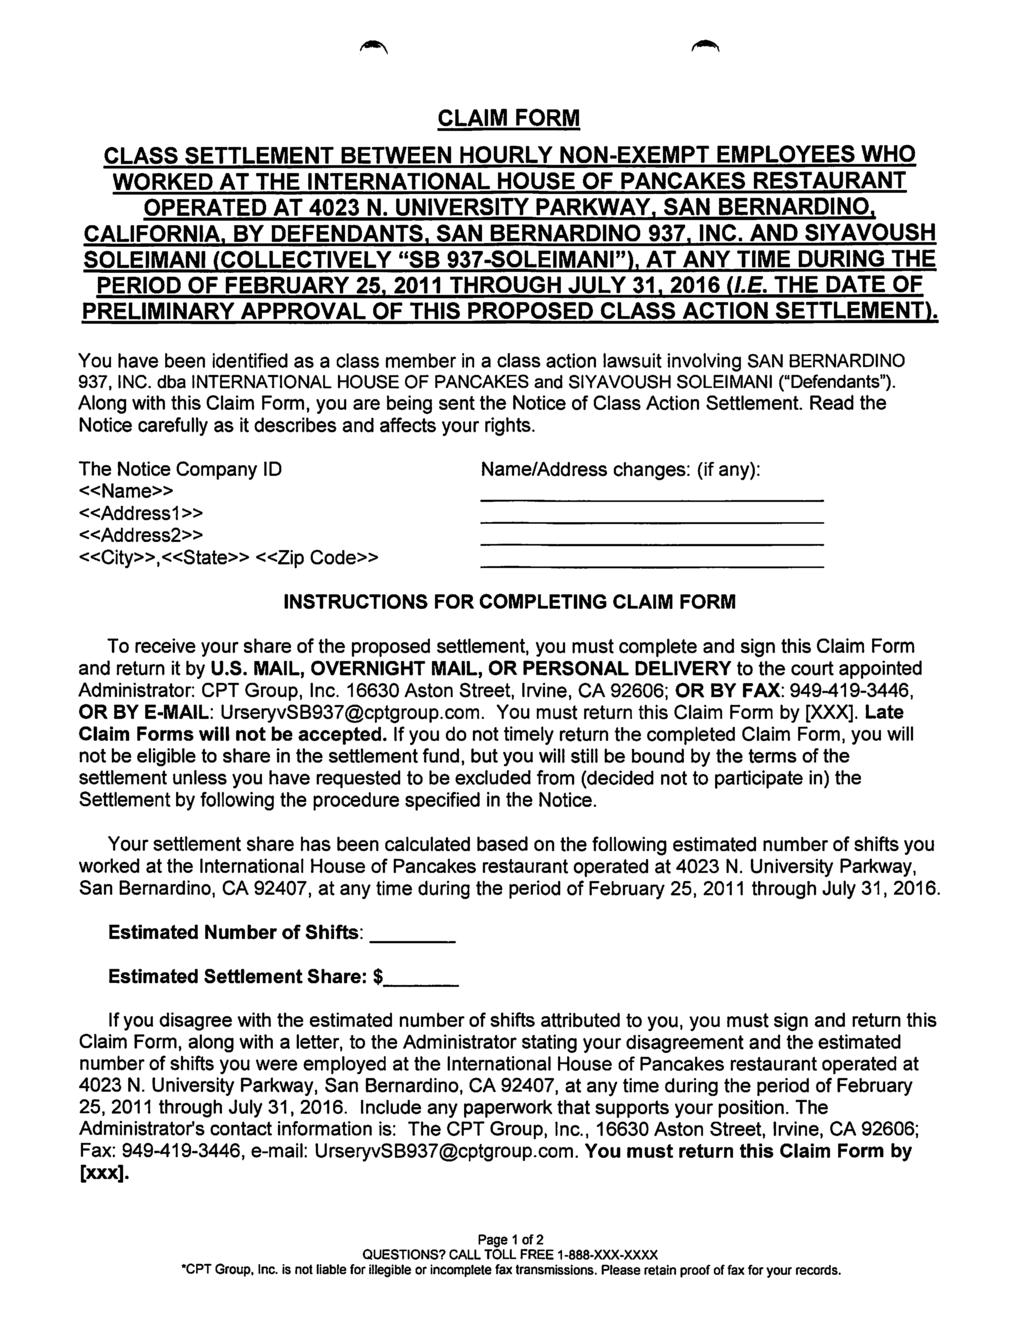 CLAIM FORM CLASS SETTLEMENT BETWEEN HOURLY NON-EXEMPT EMPLOYEES WHO WORKED AT THE INTERNATIONAL HOUSE OF PANCAKES RESTAURANT OPERATED AT 0 N. UNIVERSITY PARKWAY. SAN BERNARDINO. CALIFORNIA.